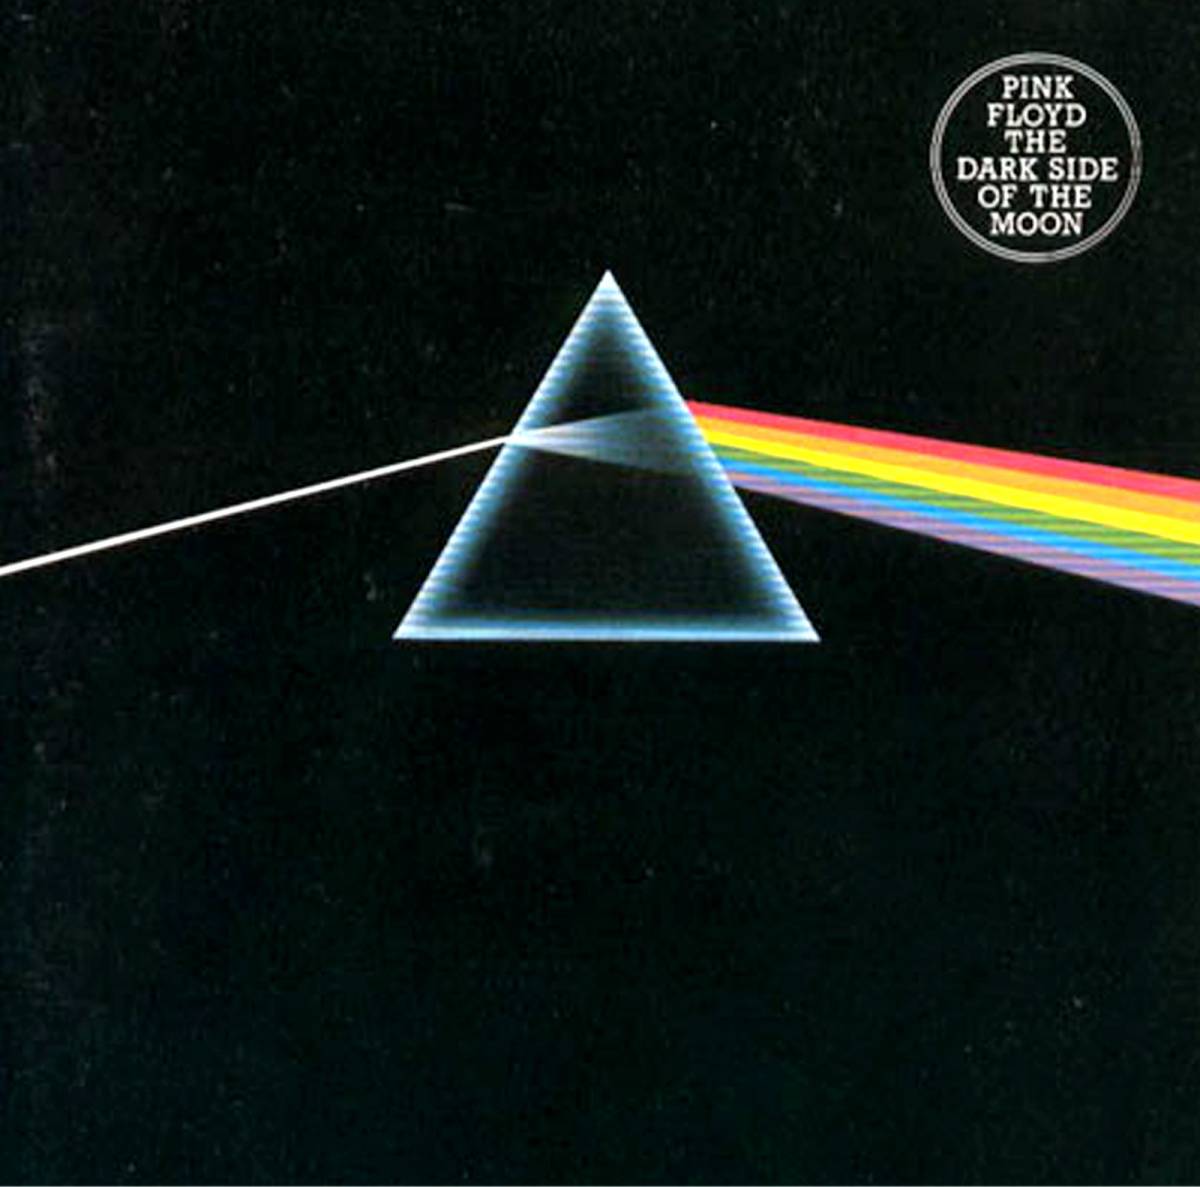 "The Dark Side Of The Moon" compie cinquant'anni. Ma non c'è pace tra i Pink Floyd